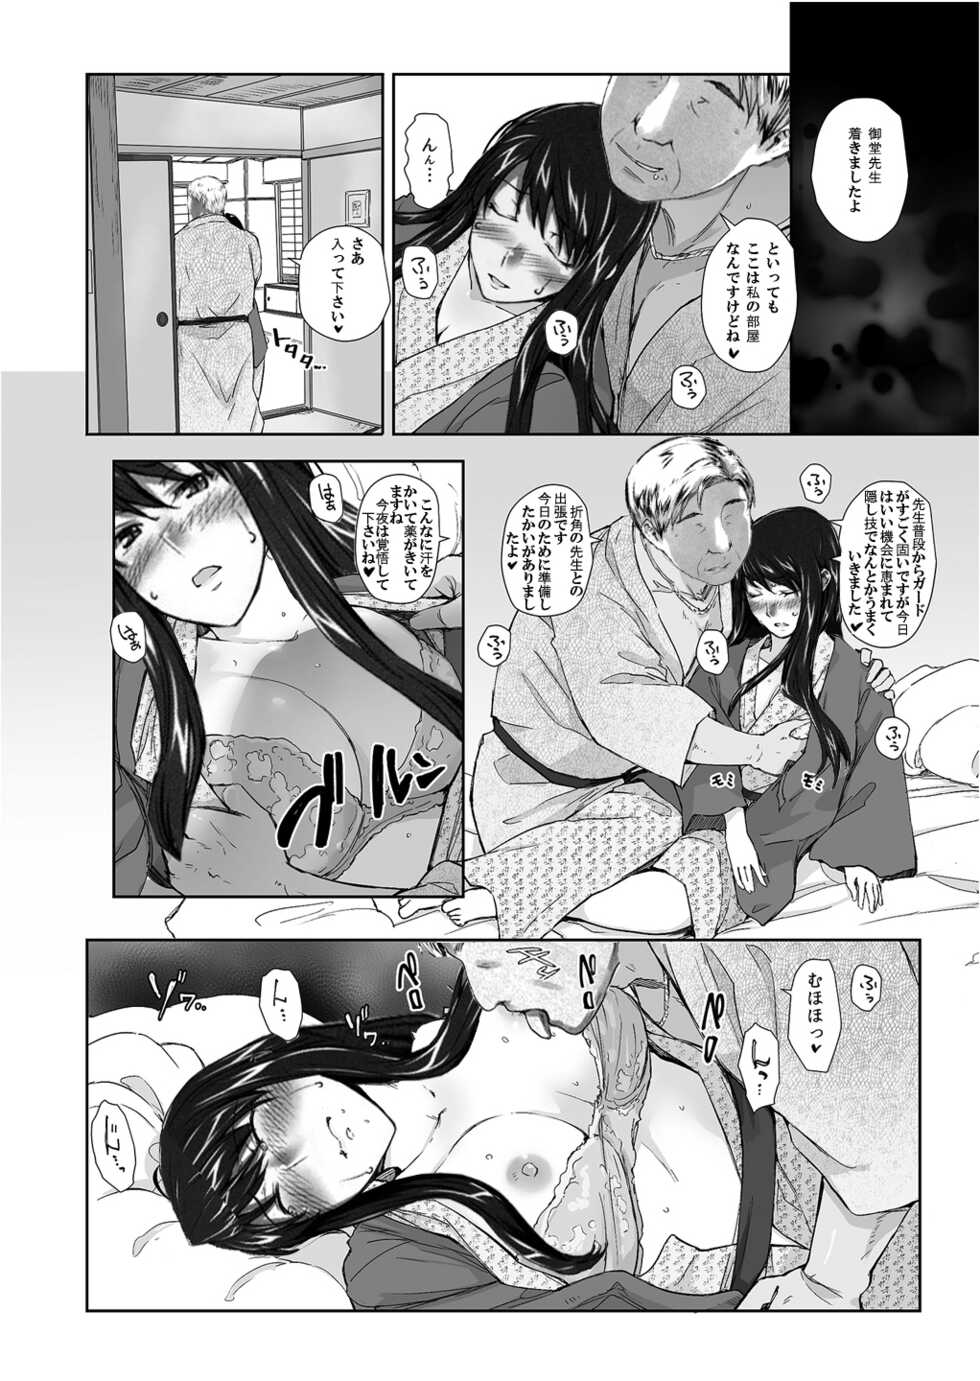 Sakiko-san in delusion Vol.8 ~Sakiko-san's circumstance at an educational training Route3~ (collage) (Continue to “First day of study trip” (page 42) of Vol.1) - Page 6